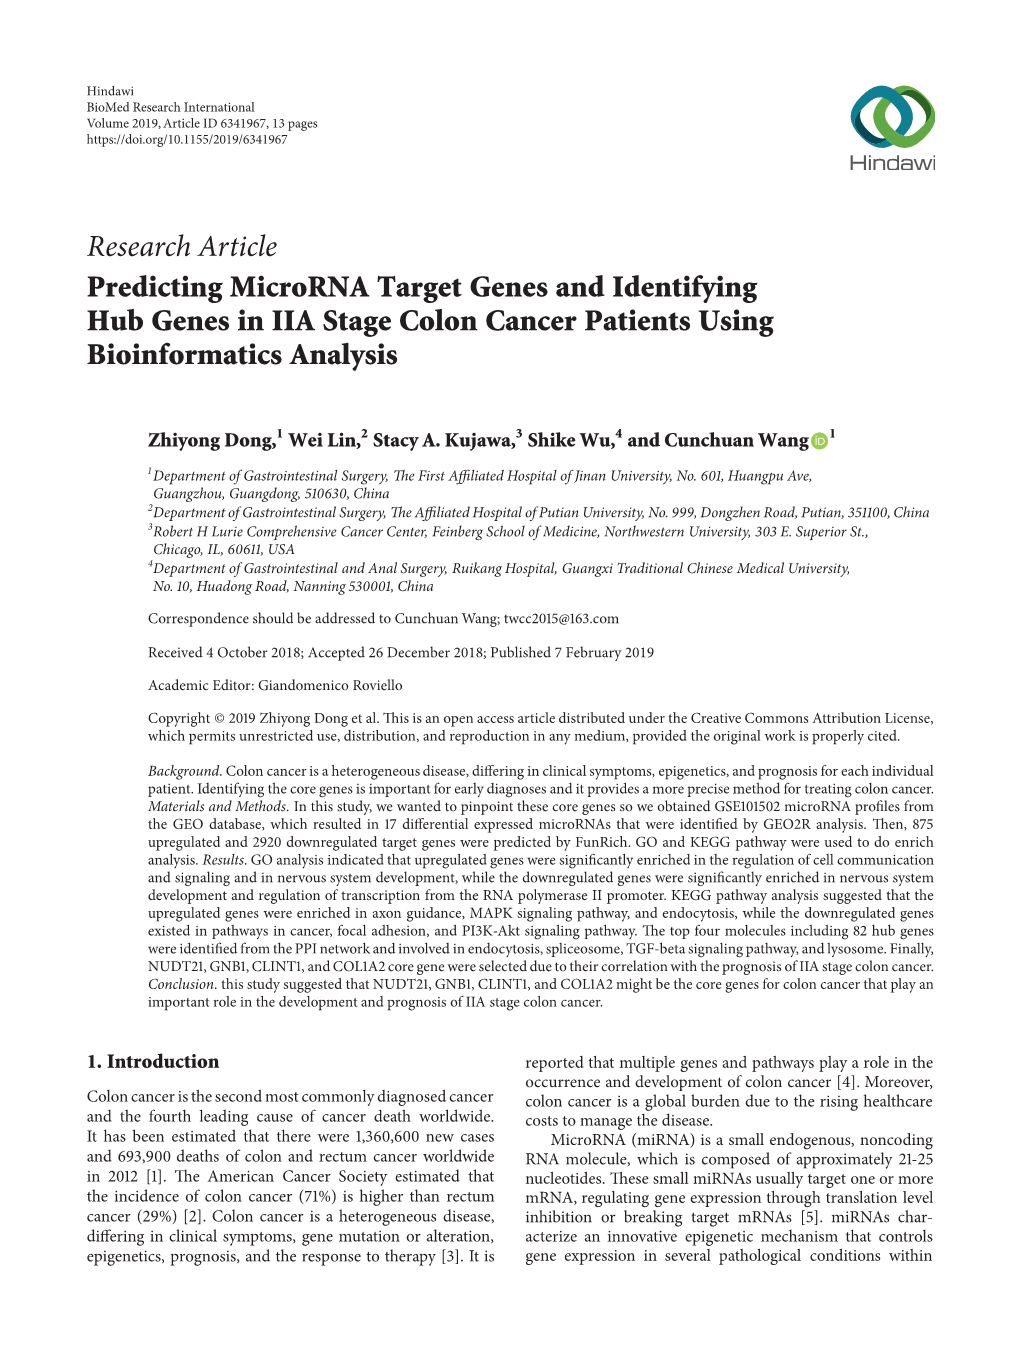 Predicting Microrna Target Genes and Identifying Hub Genes in IIA Stage Colon Cancer Patients Using Bioinformatics Analysis